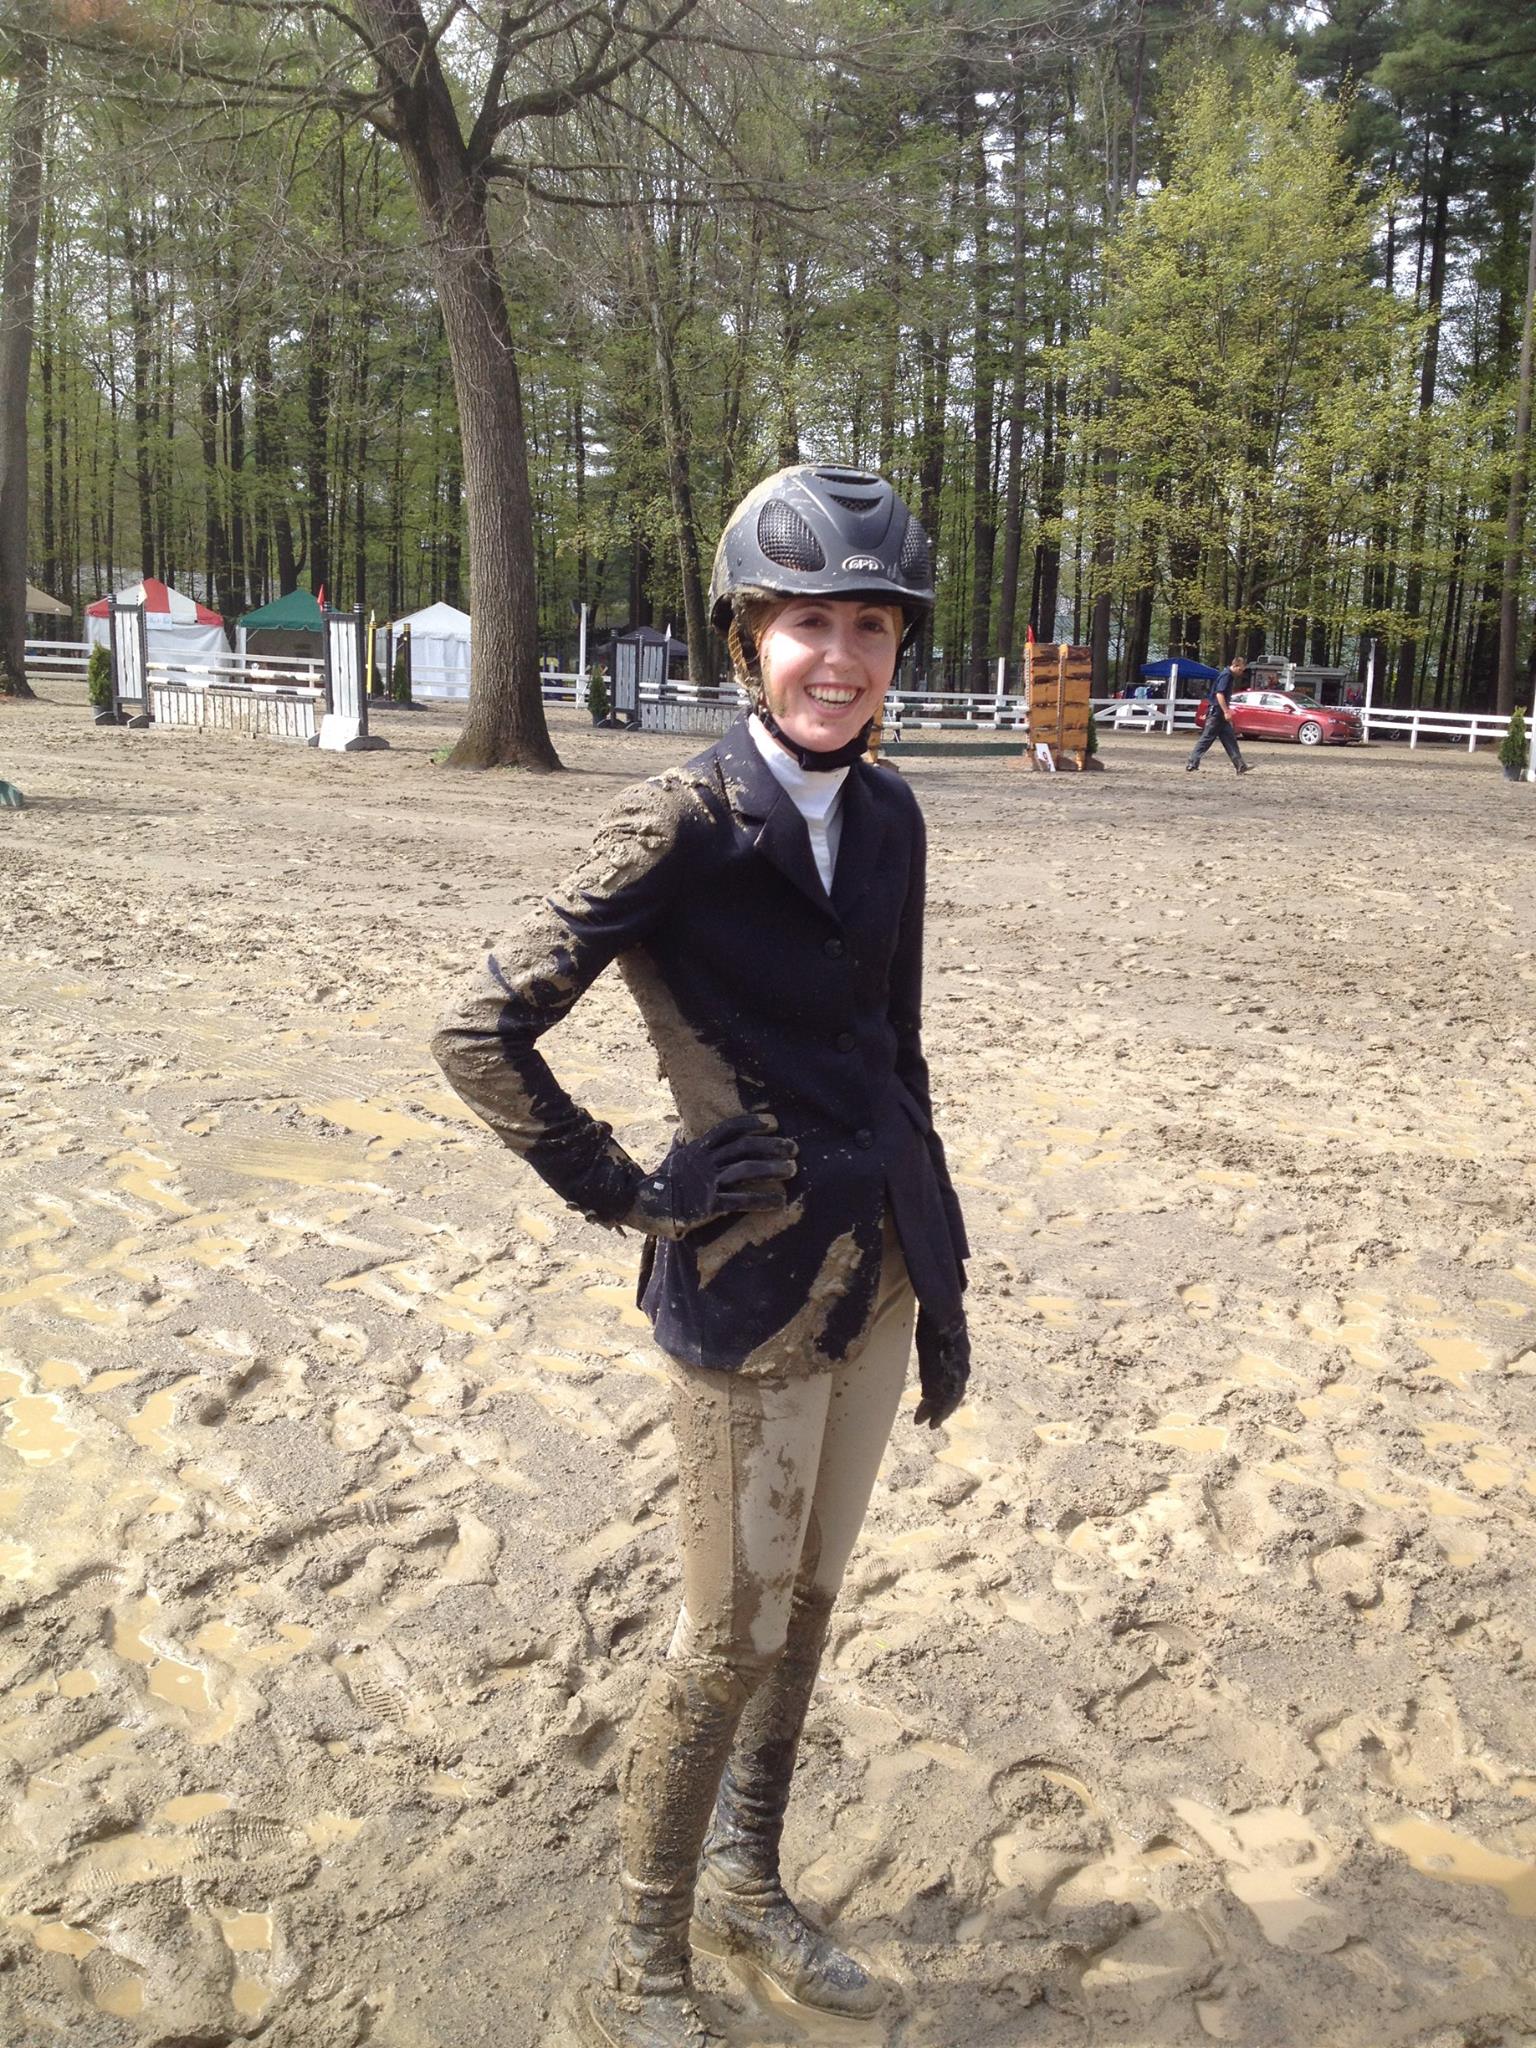 Re: Wet and Muddy Equestrians 25610-re--wet-and-muddy-equestrians.jpg